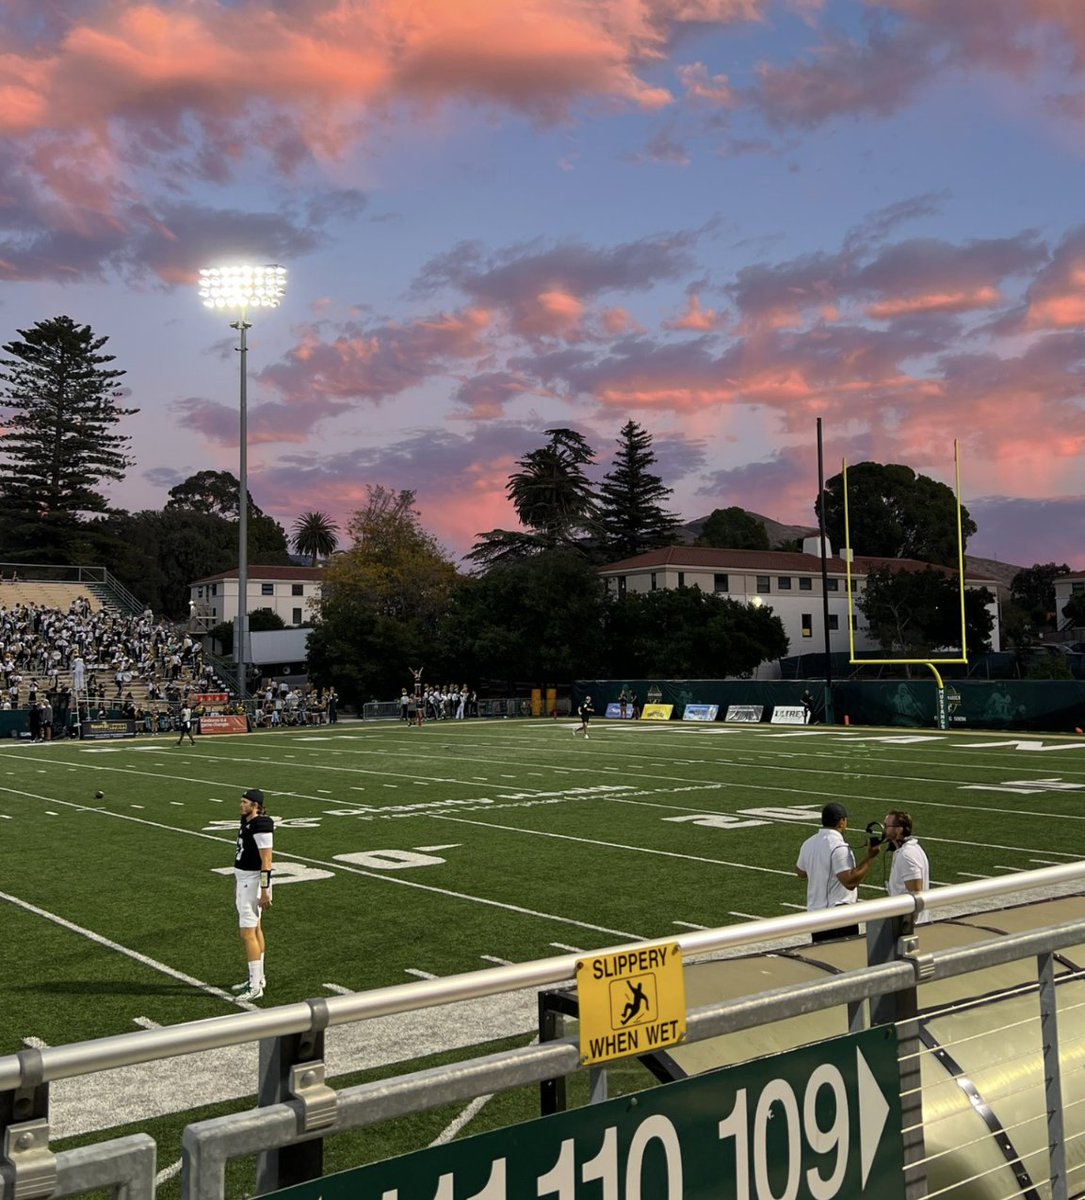 Future looks bright @calpolyfootball‼️ Thanks @wesyerty24, @CoachRyanPayne @CoachCross2 & Staff, the visit, tour, genuine hospitality & One on One @CoachWulff‼️
Game day was🔥 @AsaChatman13, (⭐⭐⭐ 24/7, Rivals, Top RB Recruits📈)You ARE Truly Blessed& HighlyFavored🙌🏽God'sPlan🙏🏽